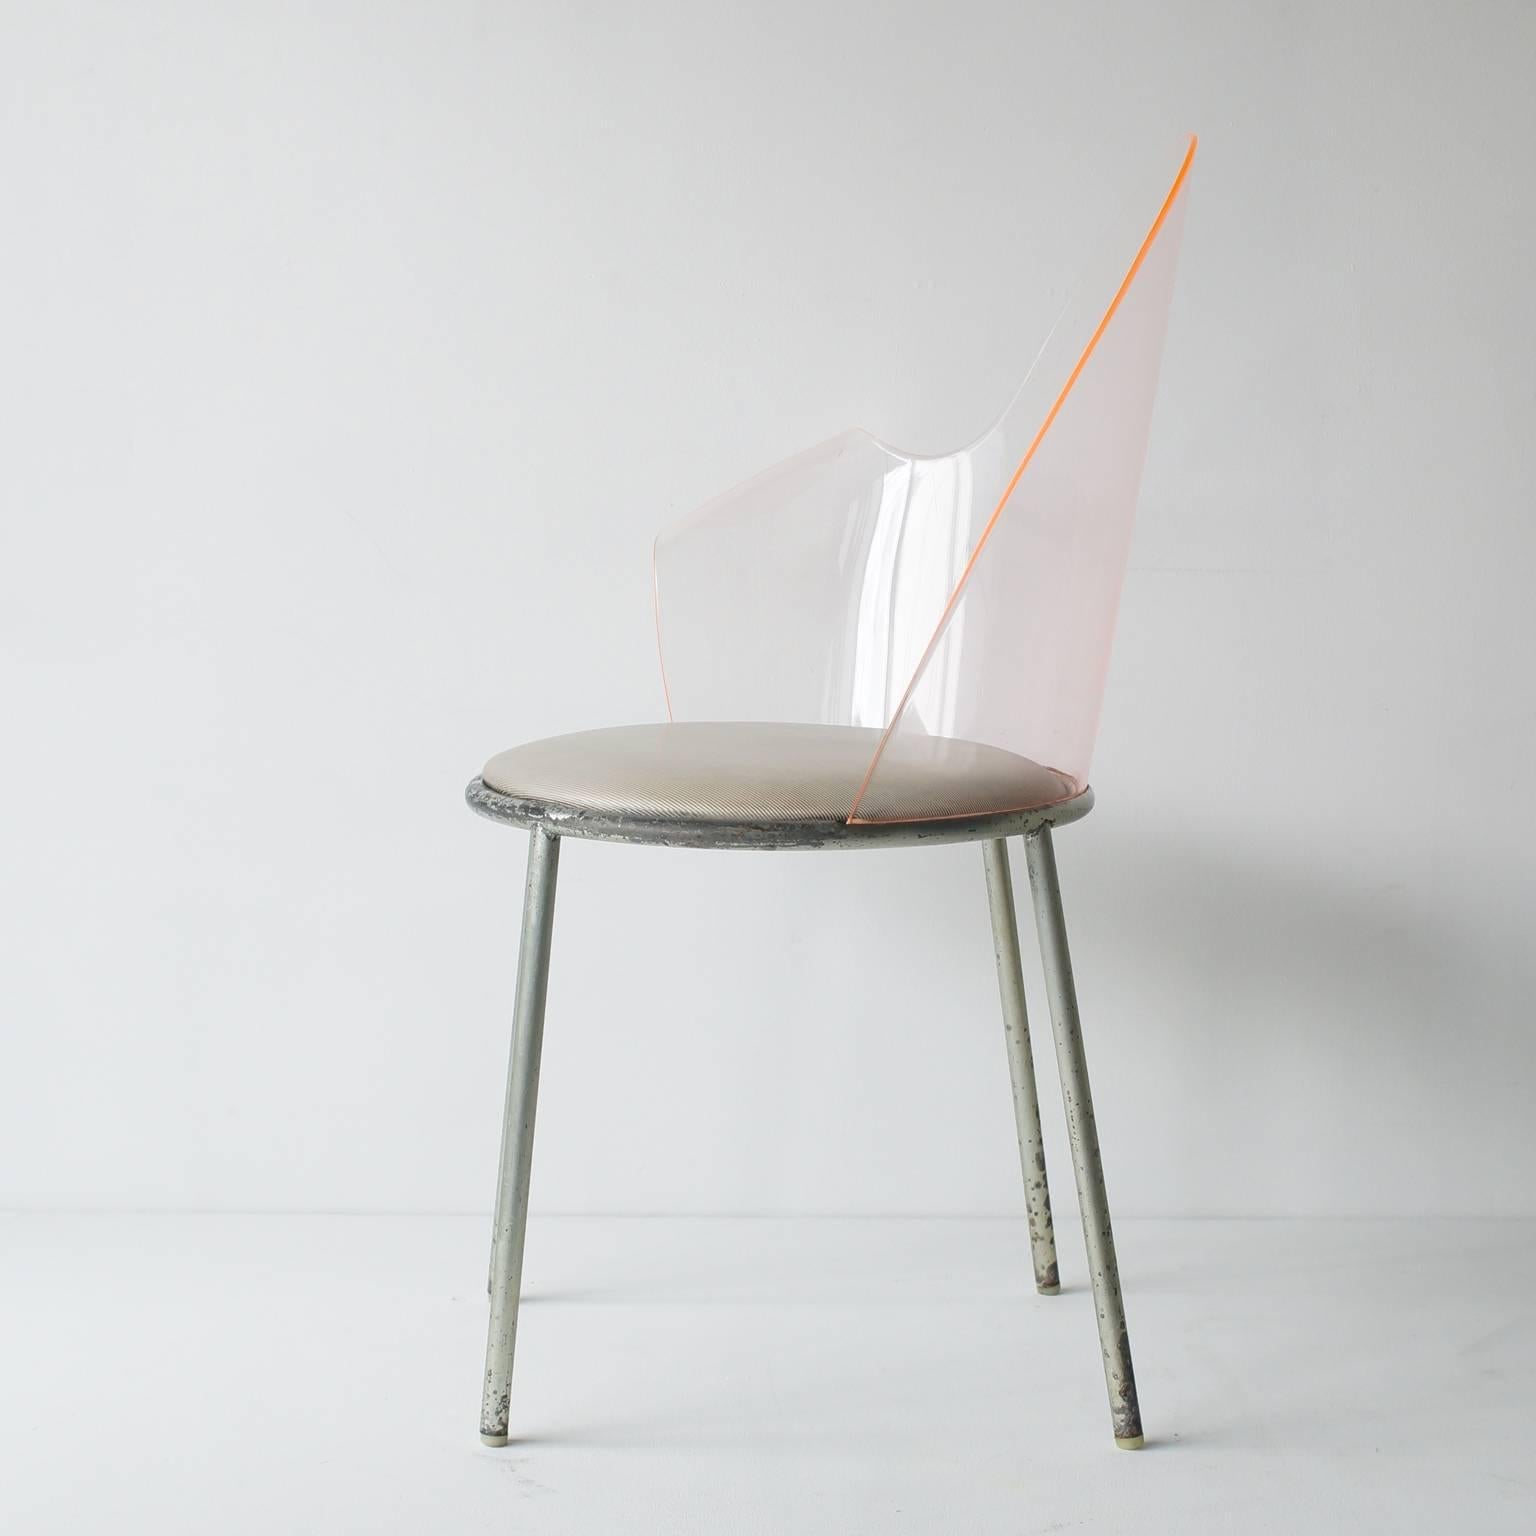 Acrylic back chair commissioned model for yamagiwa showroom. The whole space of Yamagiwa showroom interior designed by Shiro Kuramata in 1983. This chair was produced only 15 to 20 chairs. Orange acrylic back, silver painted legs with plastic or